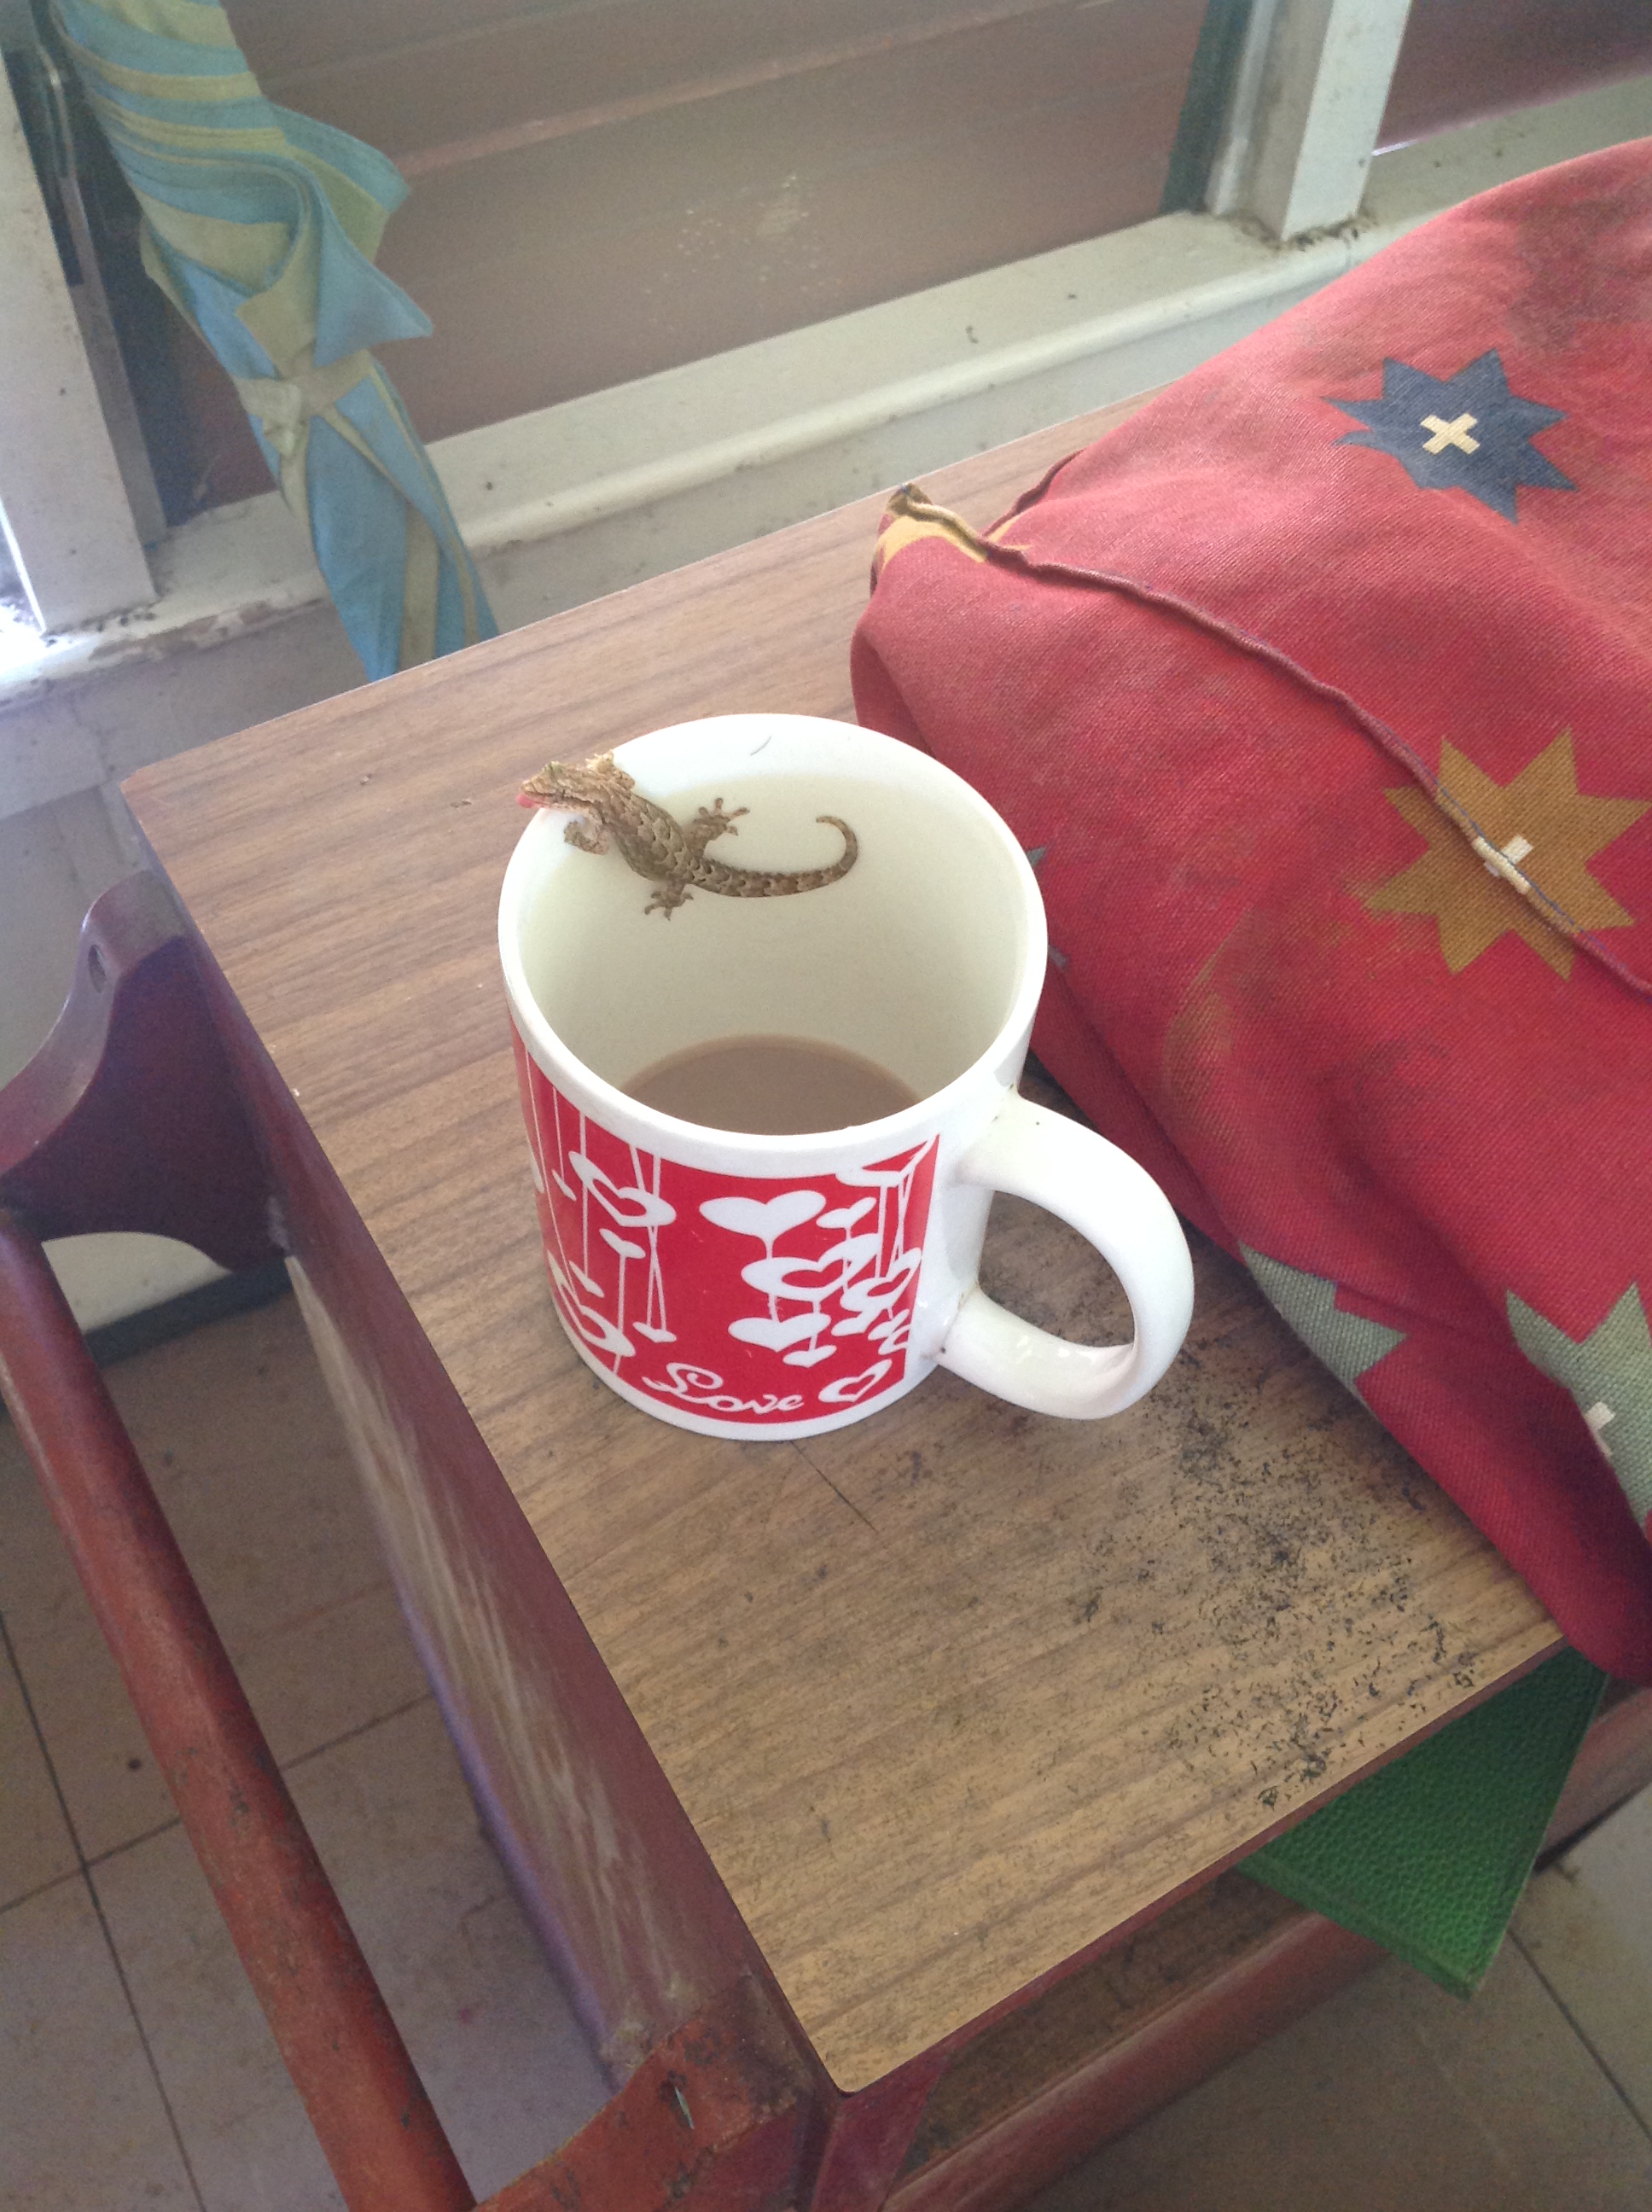 one of Arthur's many hospital visitors sharing a cup of milo